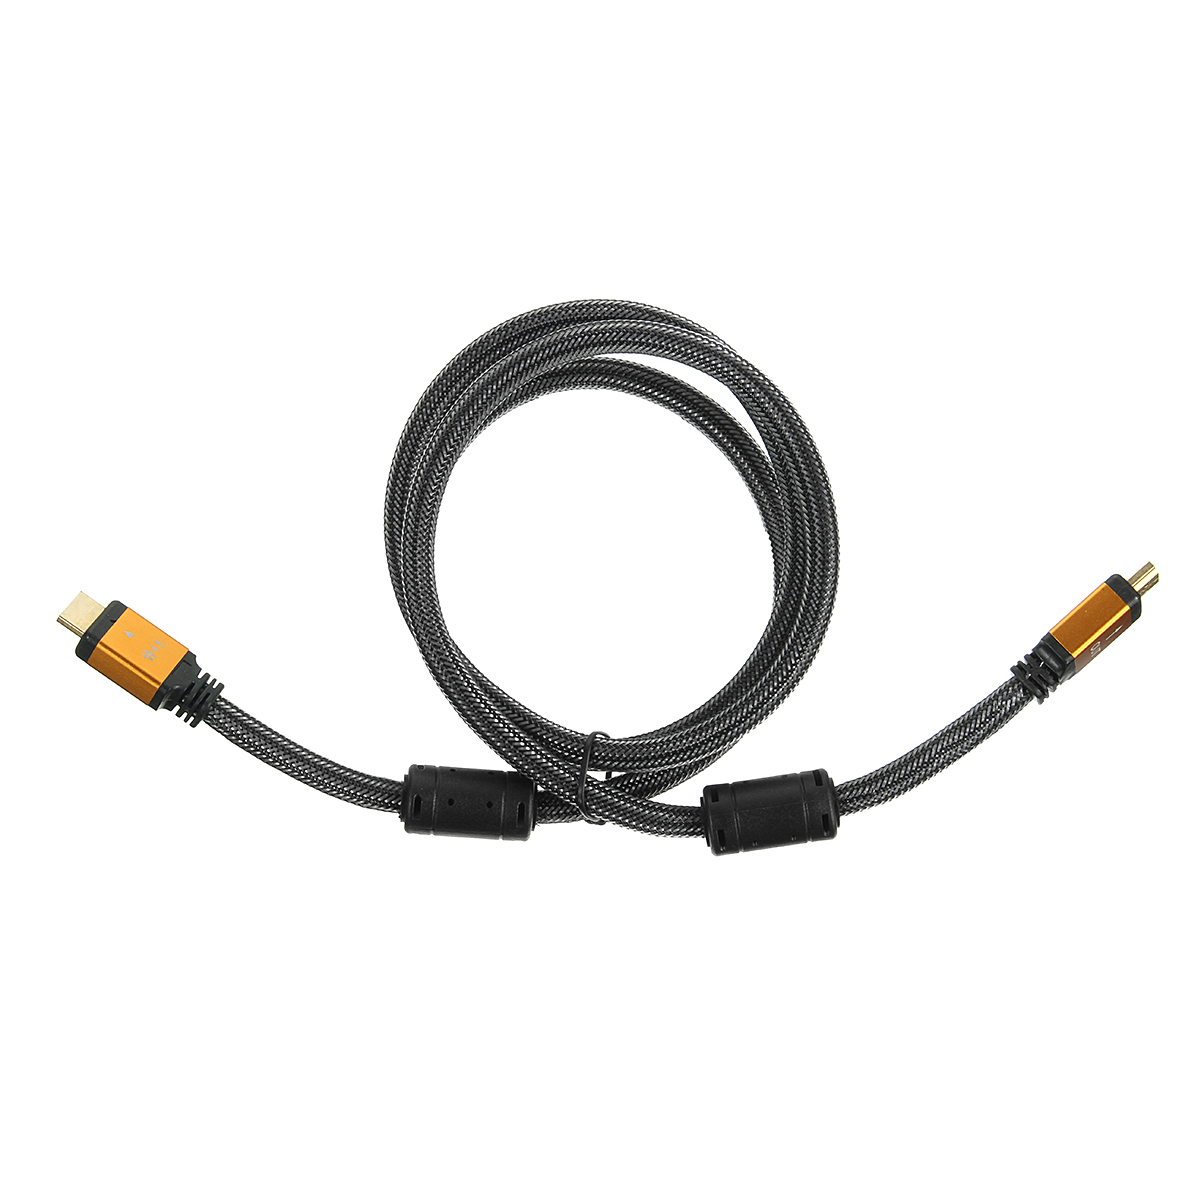 15M-3D-Orange-HD-Cable-Lead-V20-Gold-High-Speed-for-HDTV-Ultra-Hd-HD-2160p-4K-1131620-3